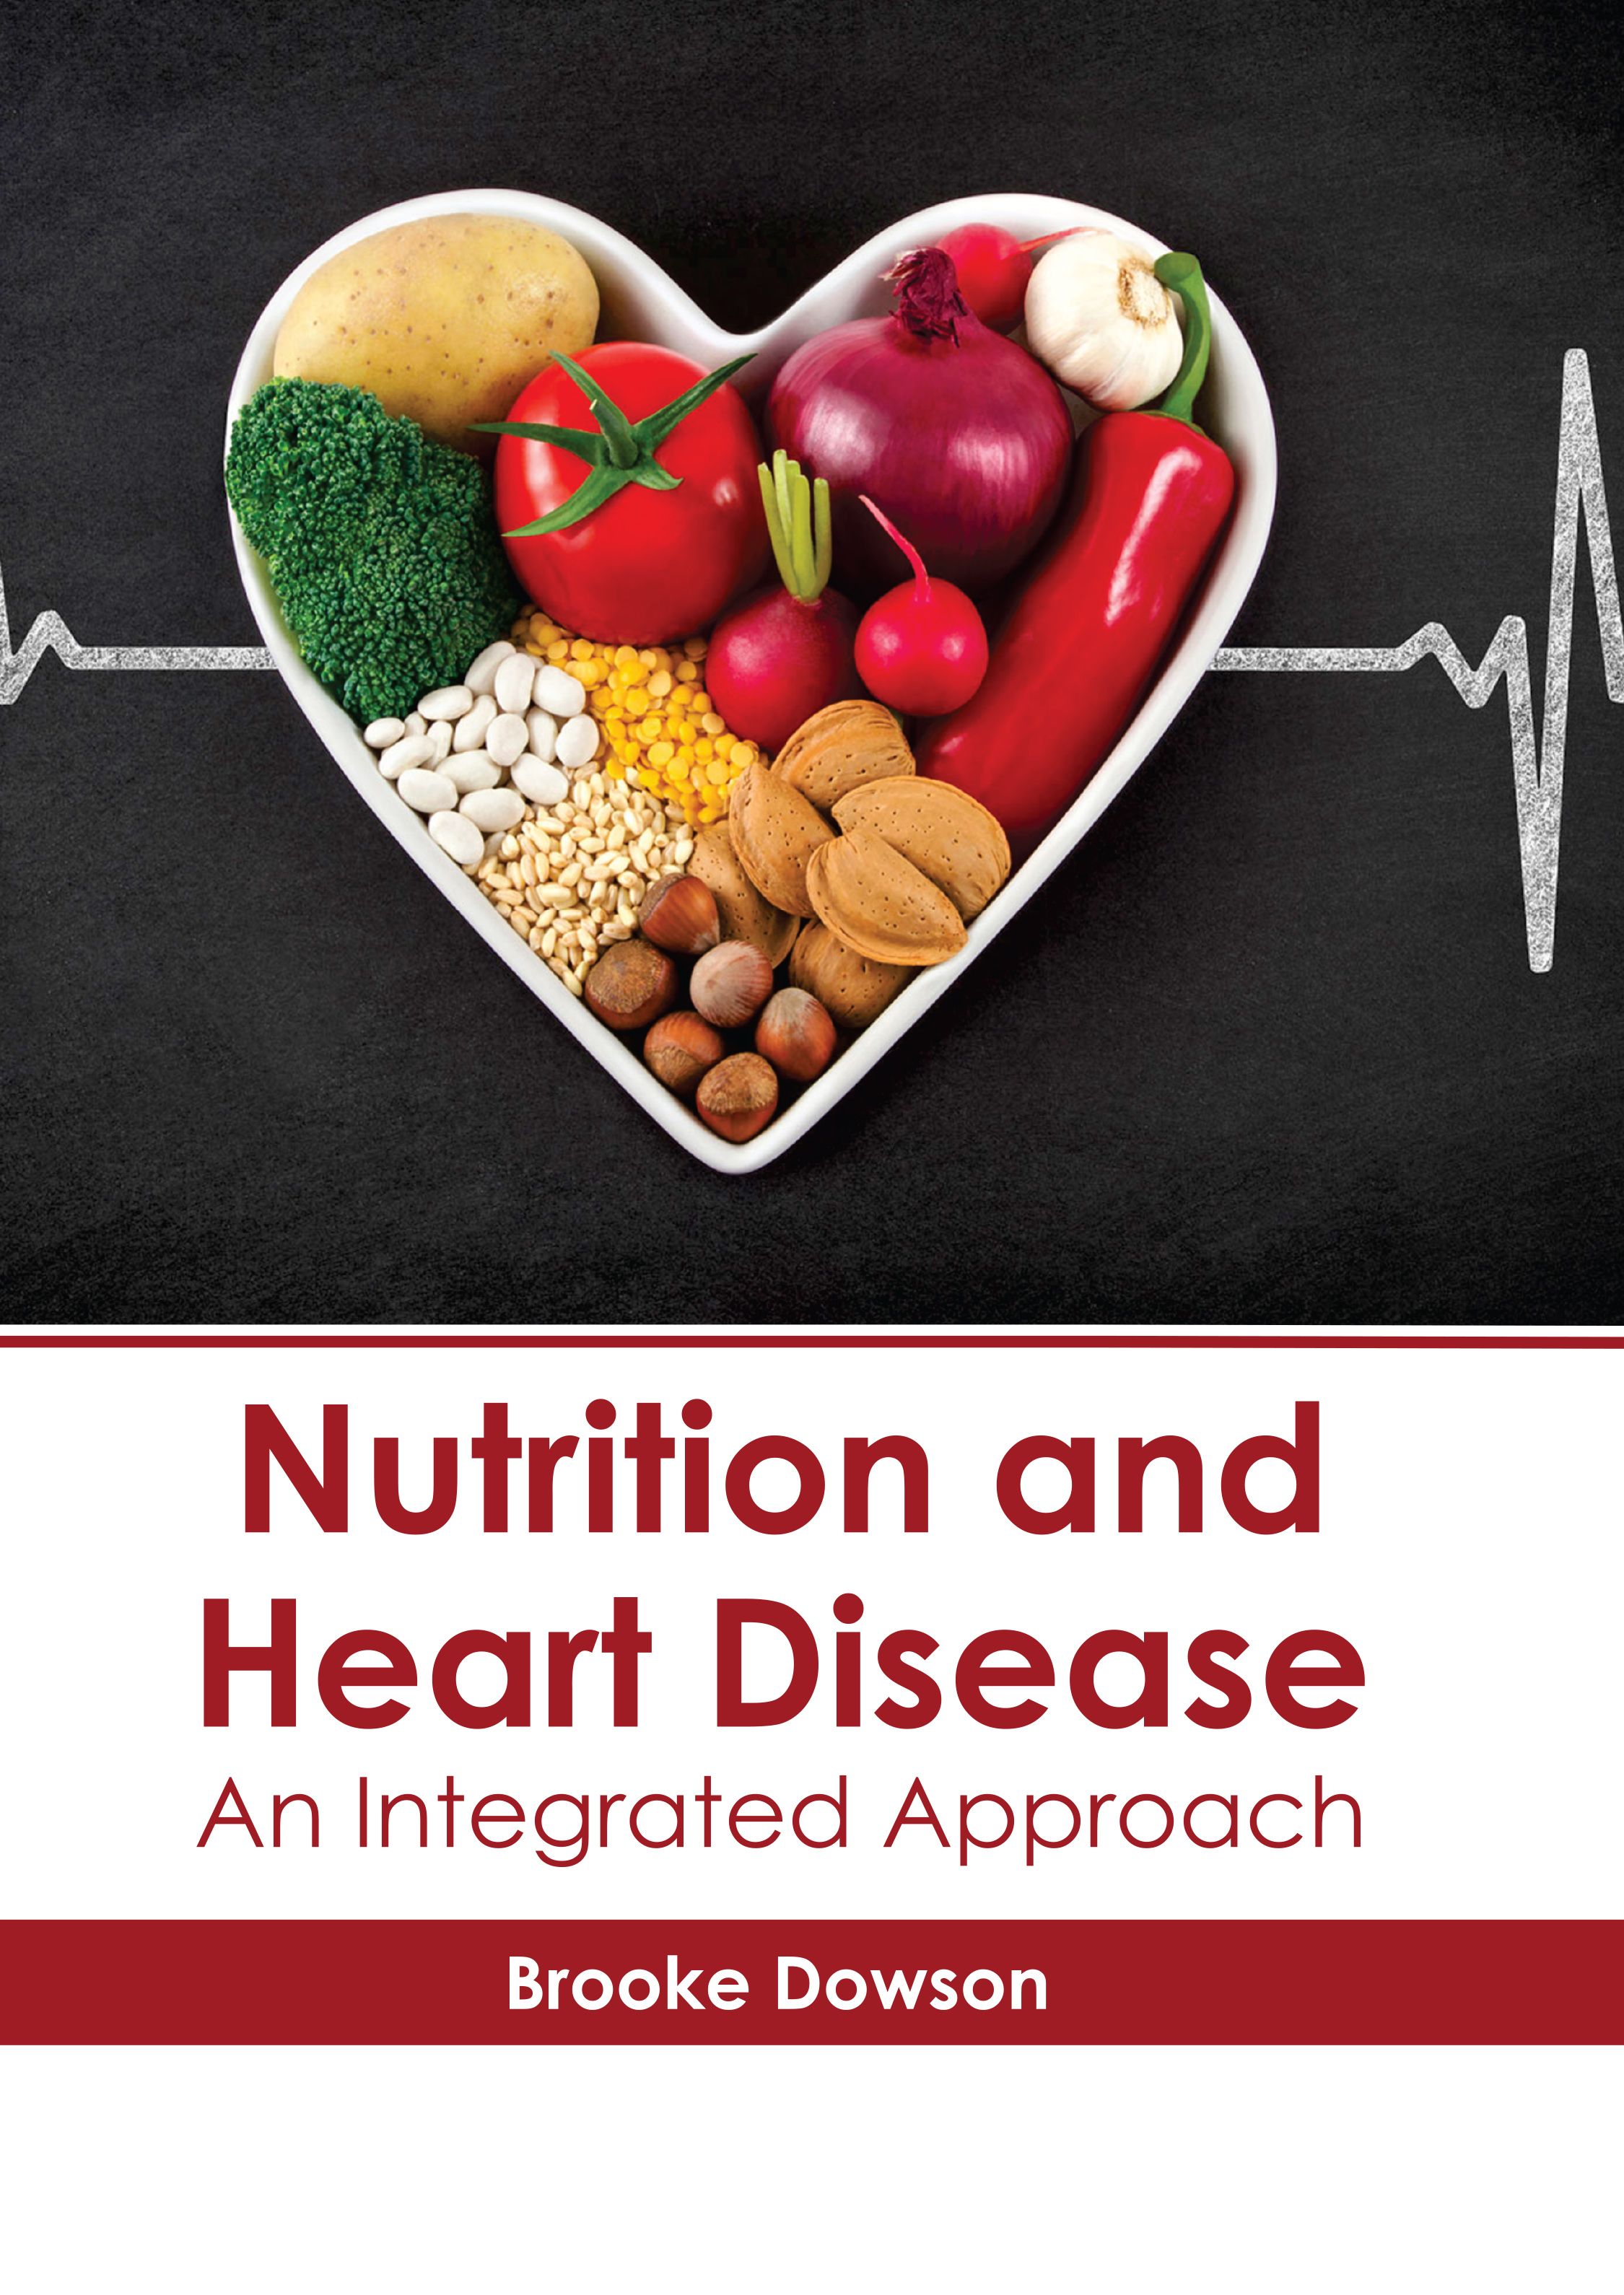 NUTRITION AND HEART DISEASE: AN INTEGRATED APPROACH